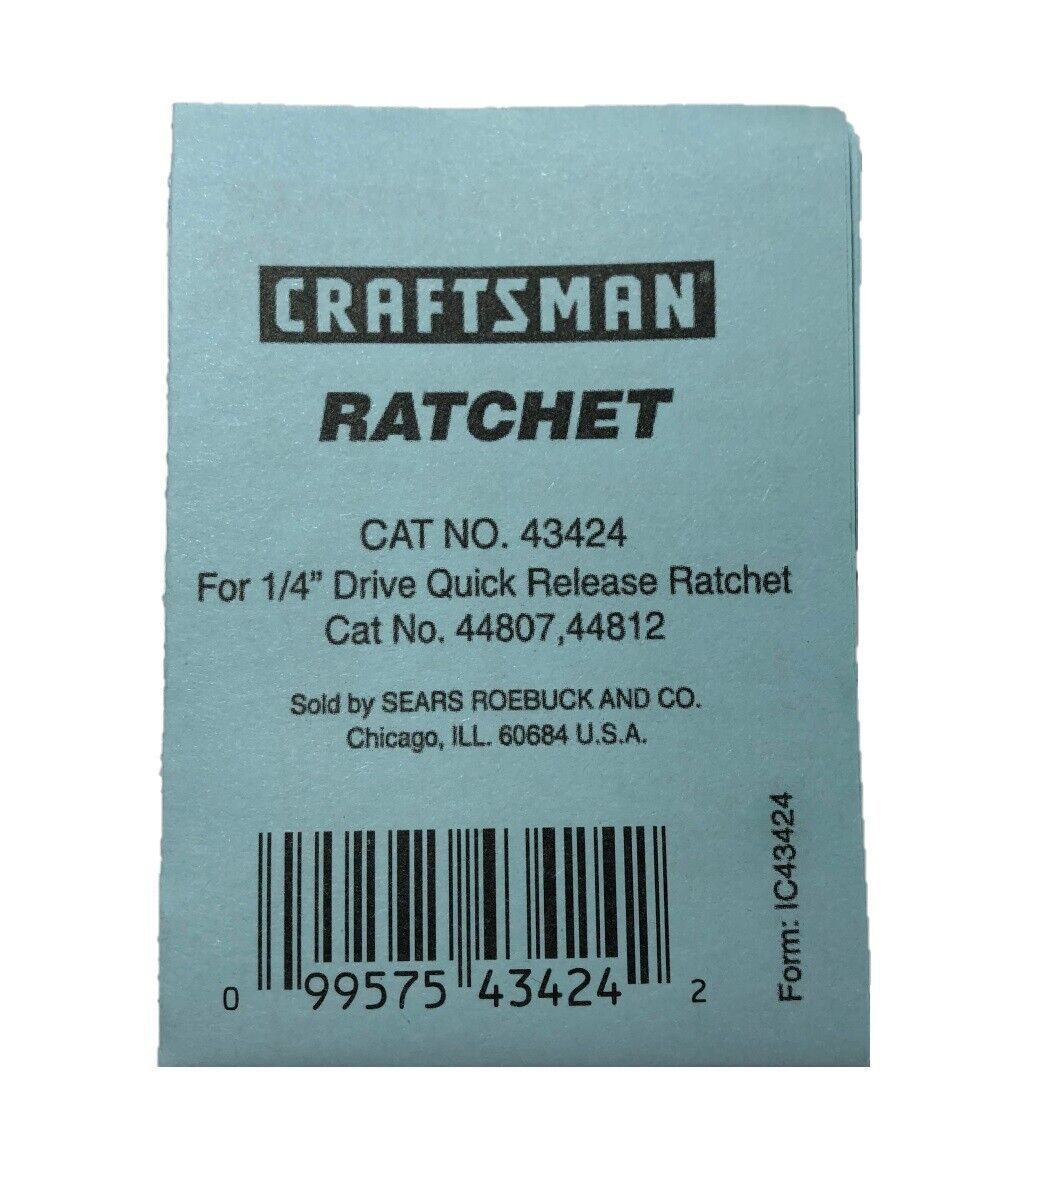  midwesttoolco NEW Craftsman 1/4 Quick Release Ratchet Repair Kit 43424 for 44807, 44812 